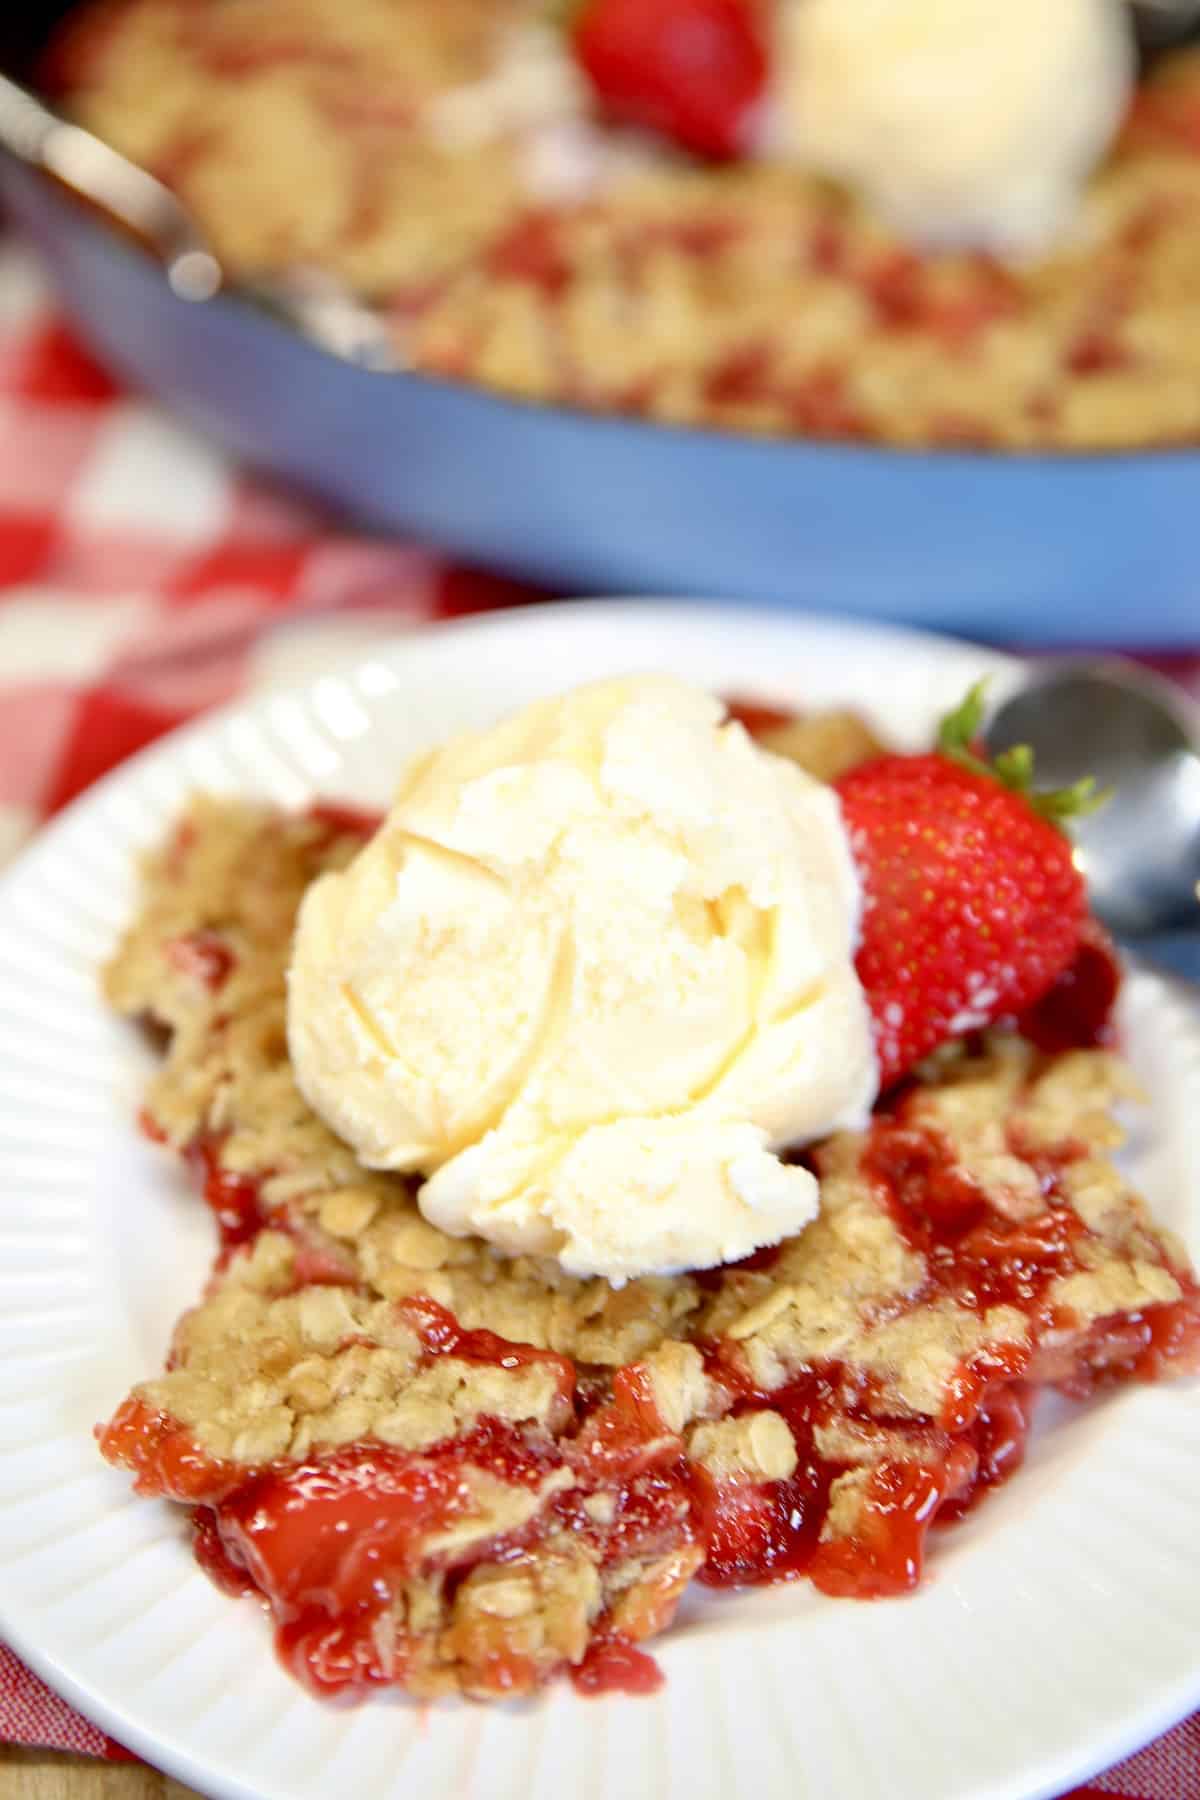 Plate of strawberry crisp topped with vanilla ice cream.